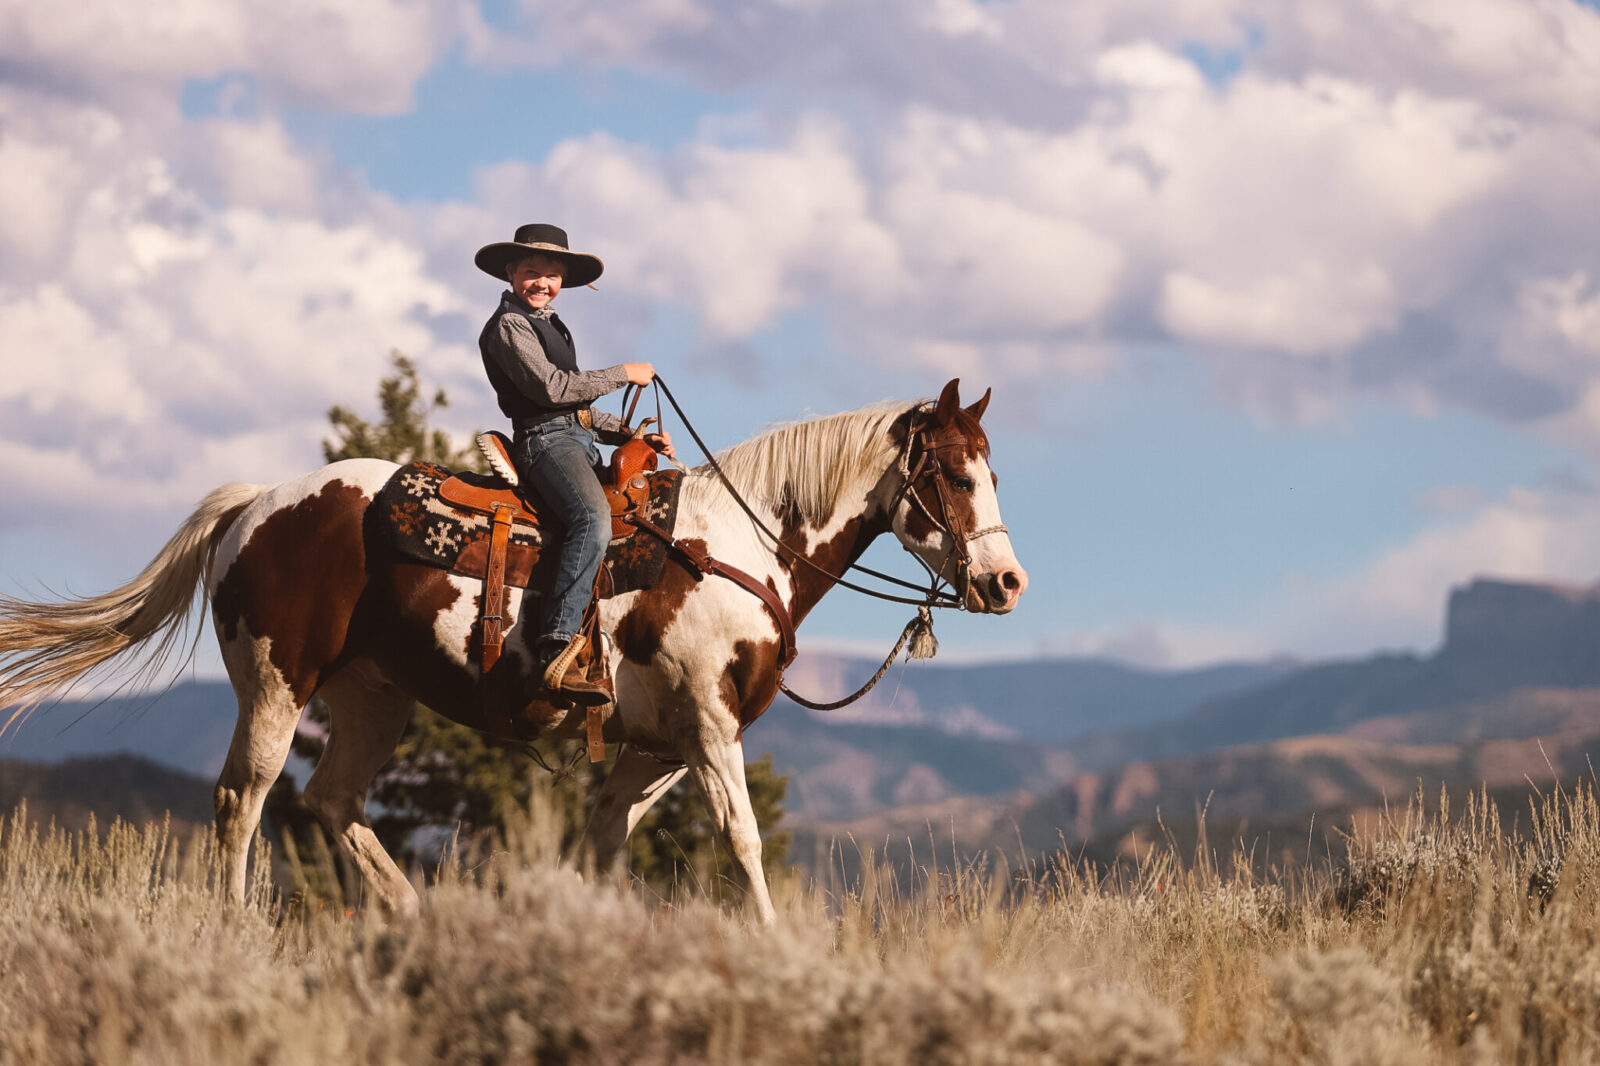 A smiling boy in a black cowboy hat rides a stocky Paint gelding in front of a grand mountain view.